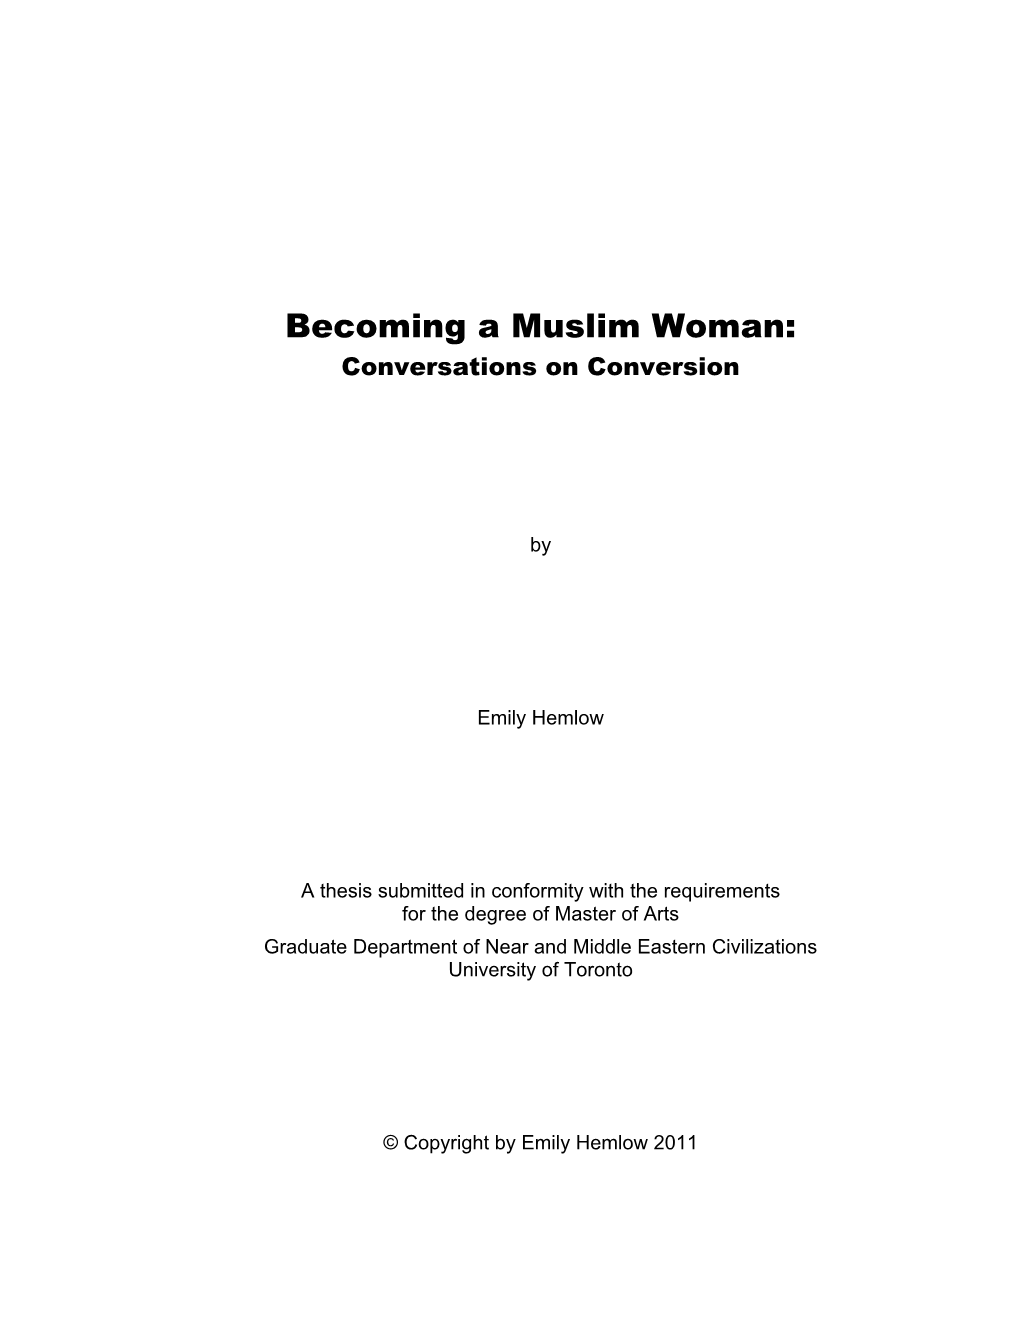 Becoming a Muslim Woman: Conversations on Conversion